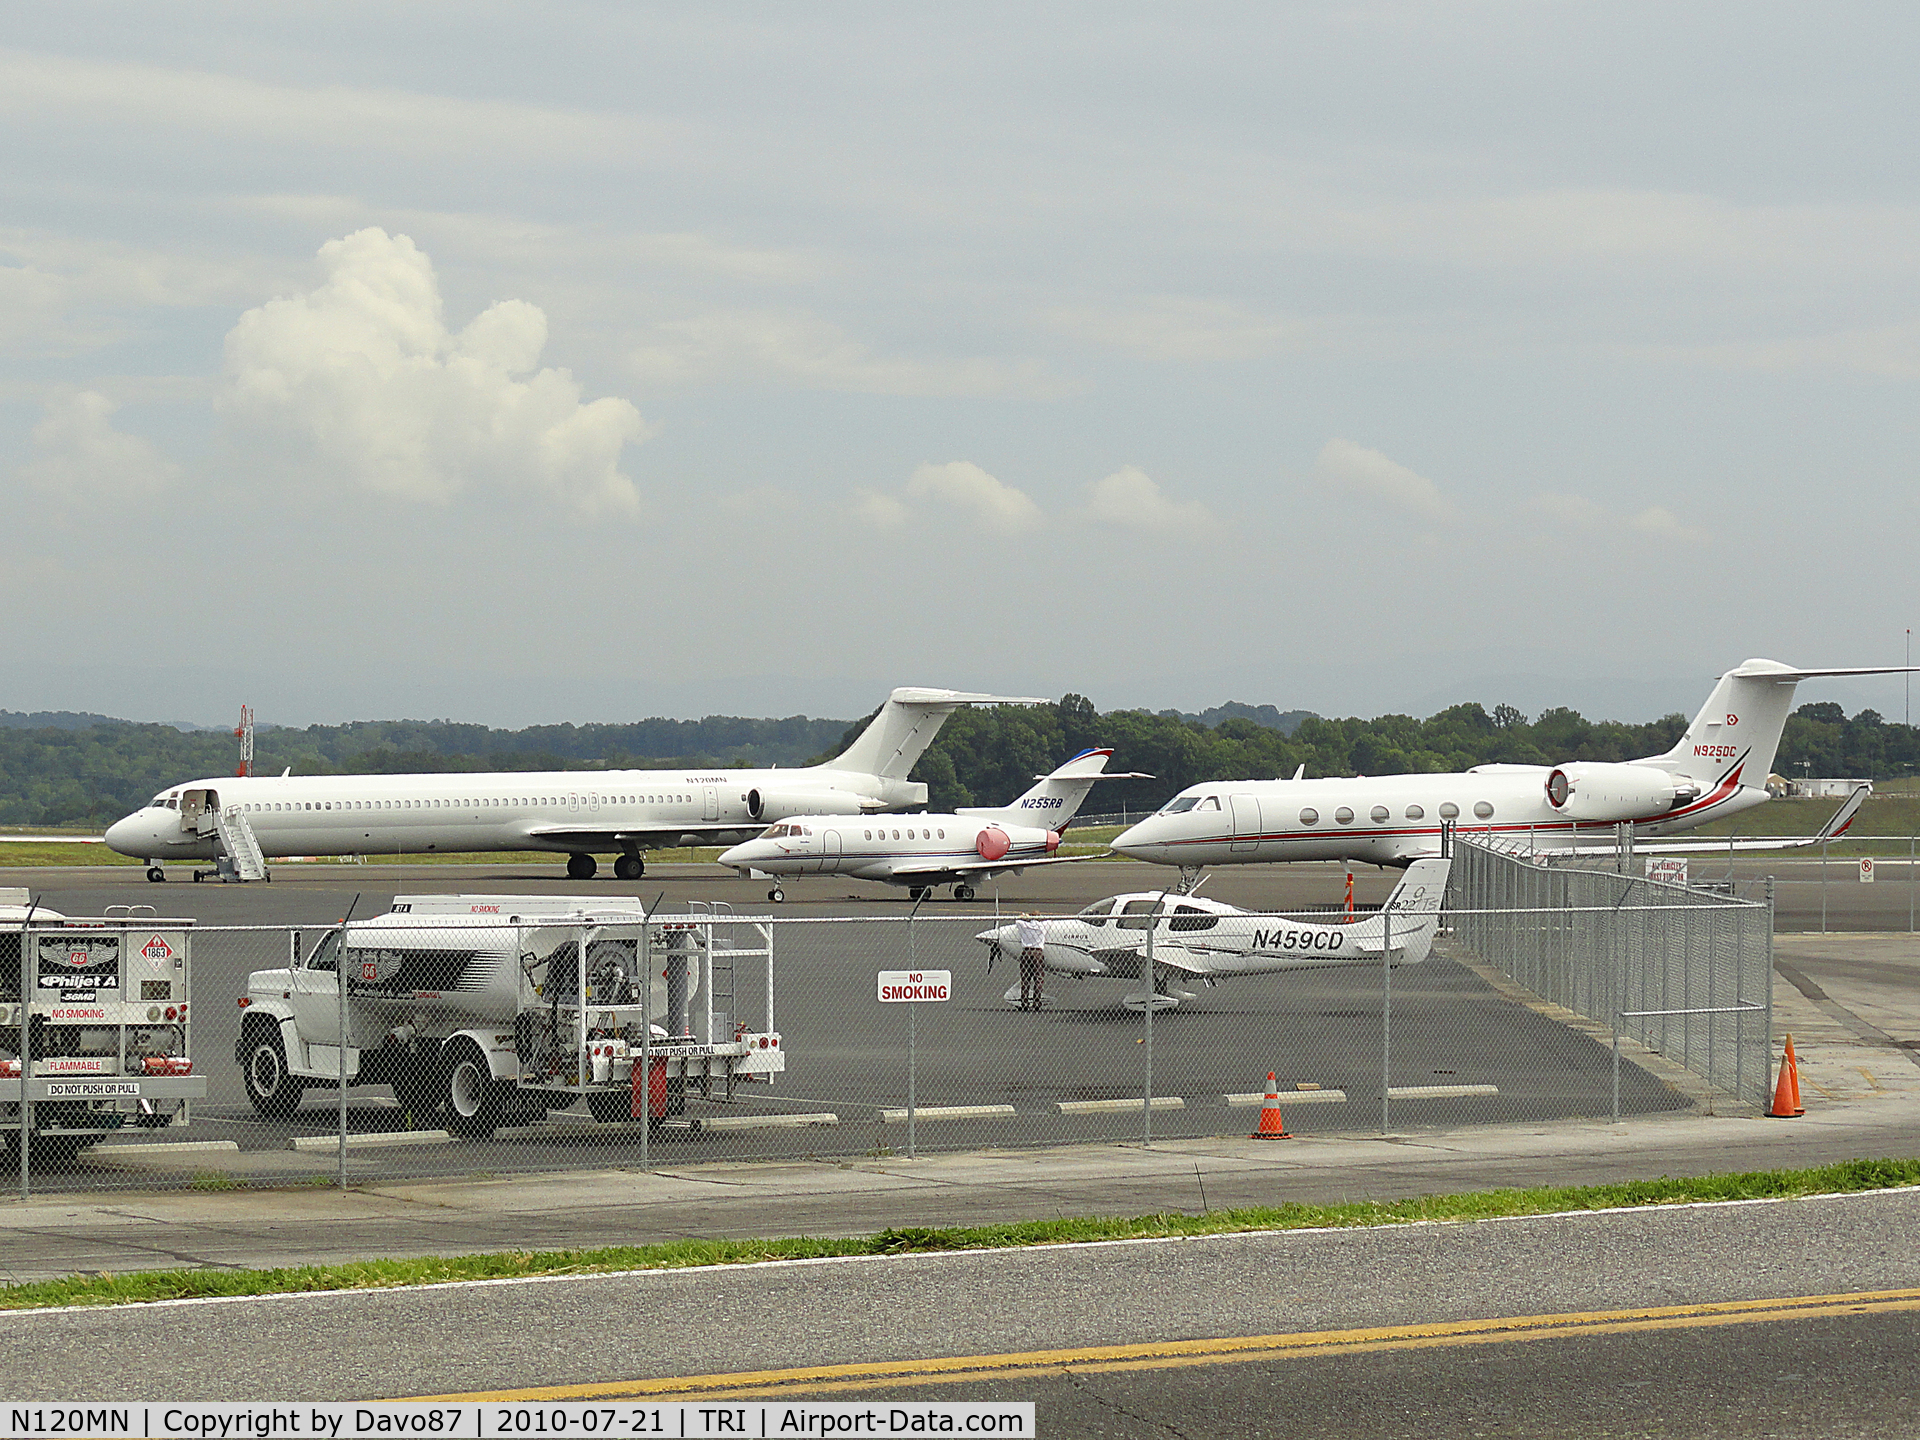 N120MN, 1992 McDonnell Douglas MD-83 C/N 53120, N120MN parked with several other aircraft.